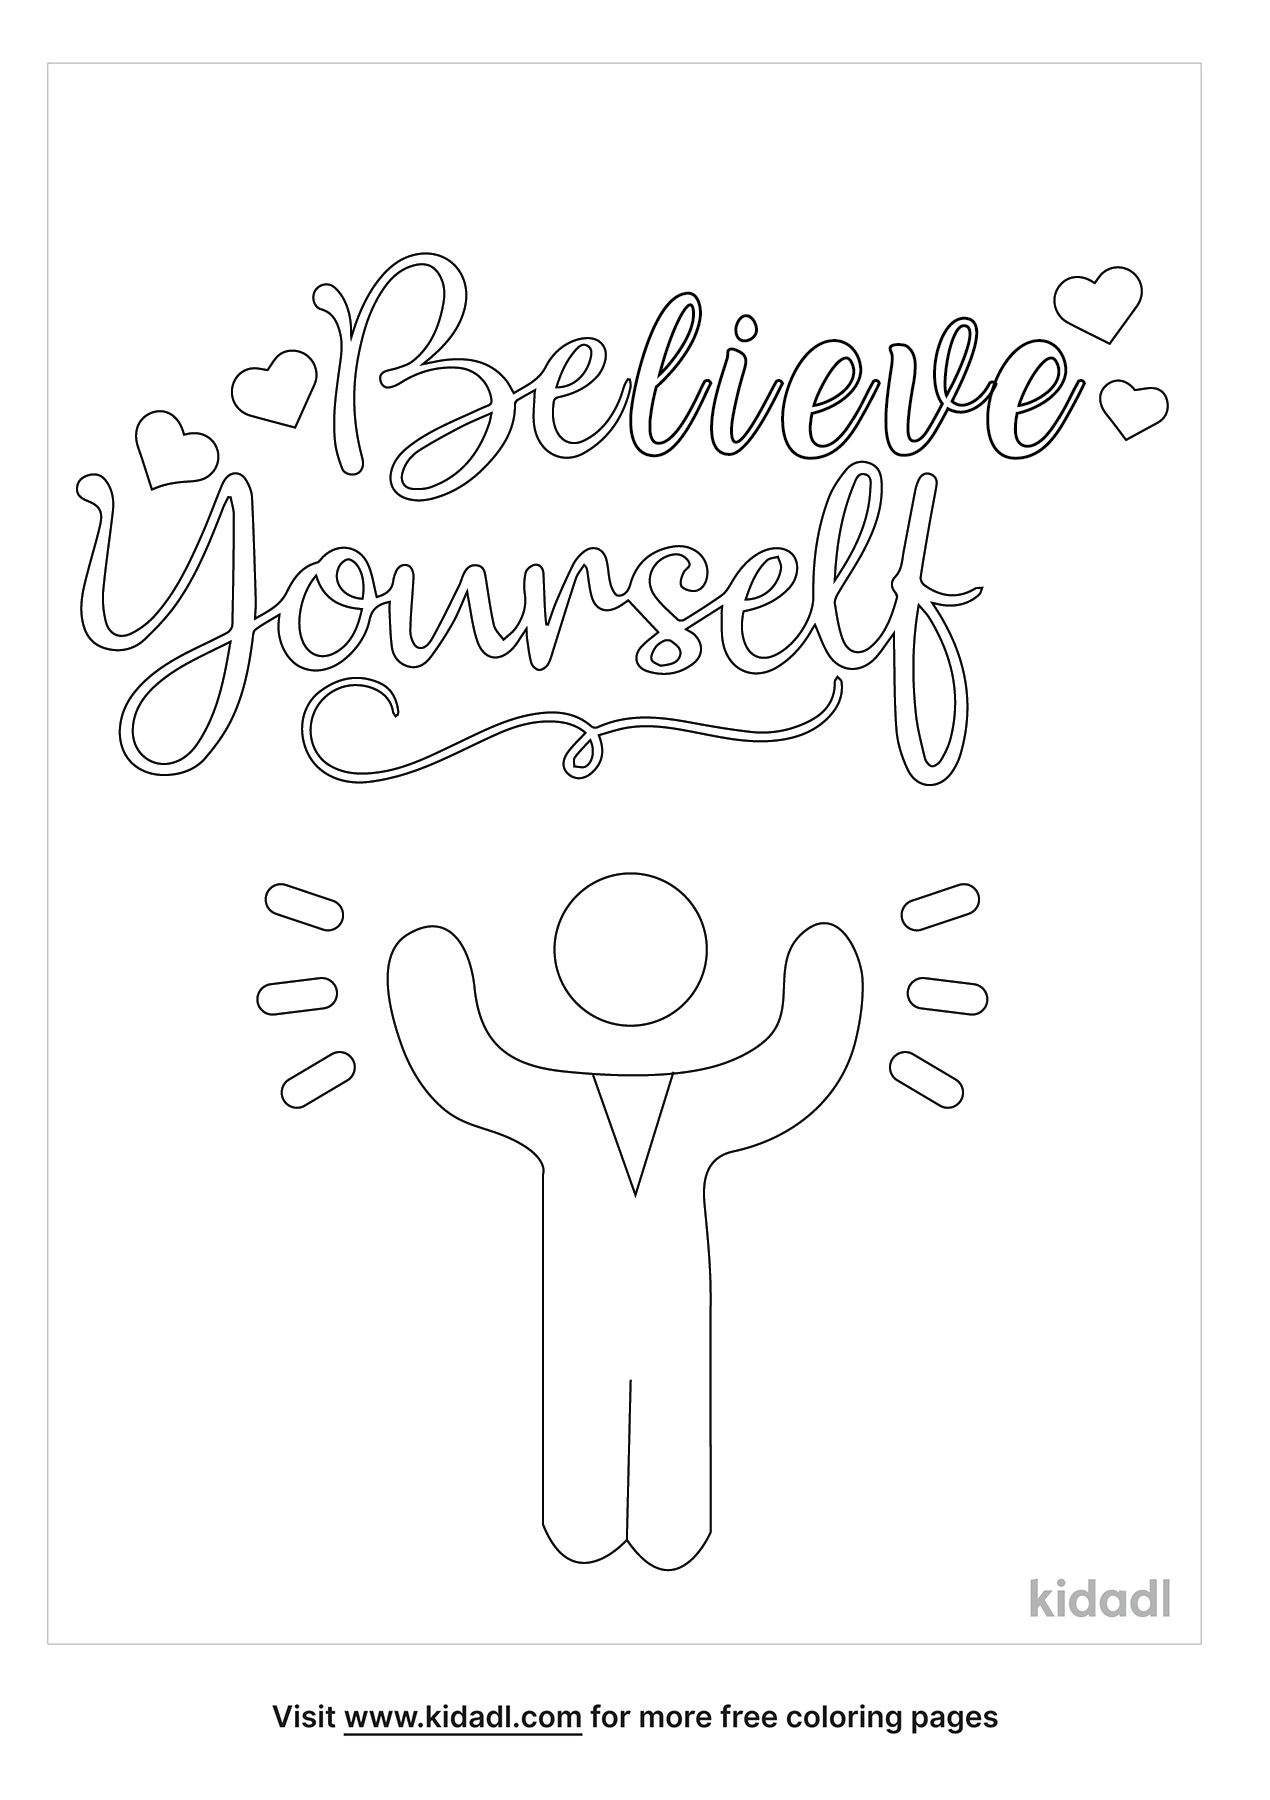 Believe Yourself Coloring Pages | Free Words & Quotes Coloring Pages |  Kidadl